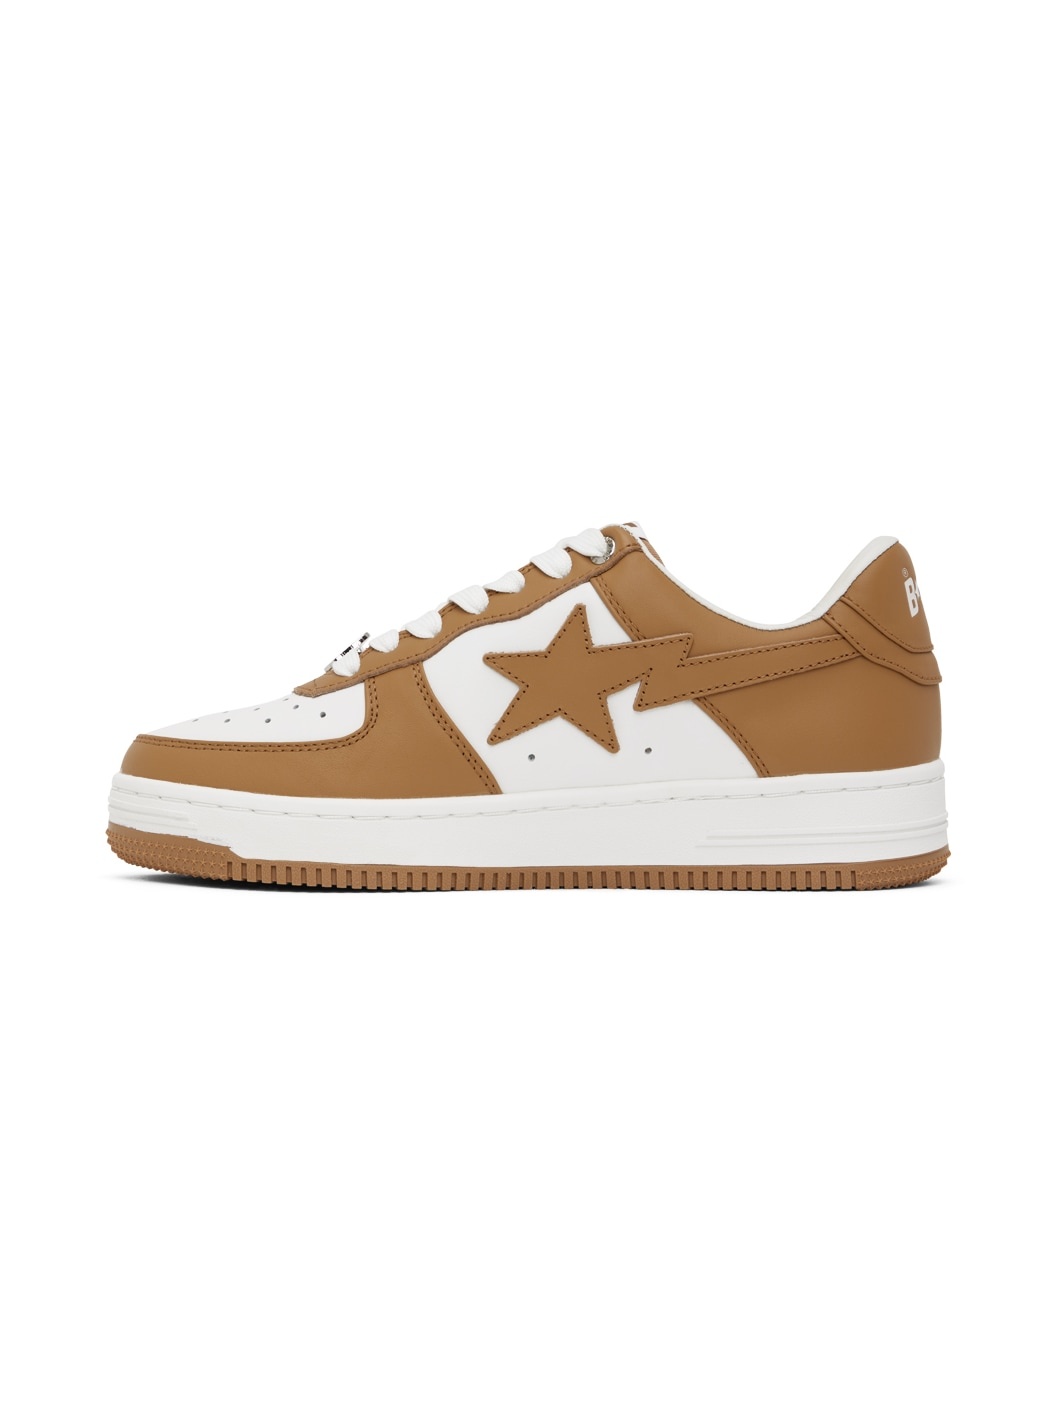 Brown & White Sta #4 Sneakers - 3